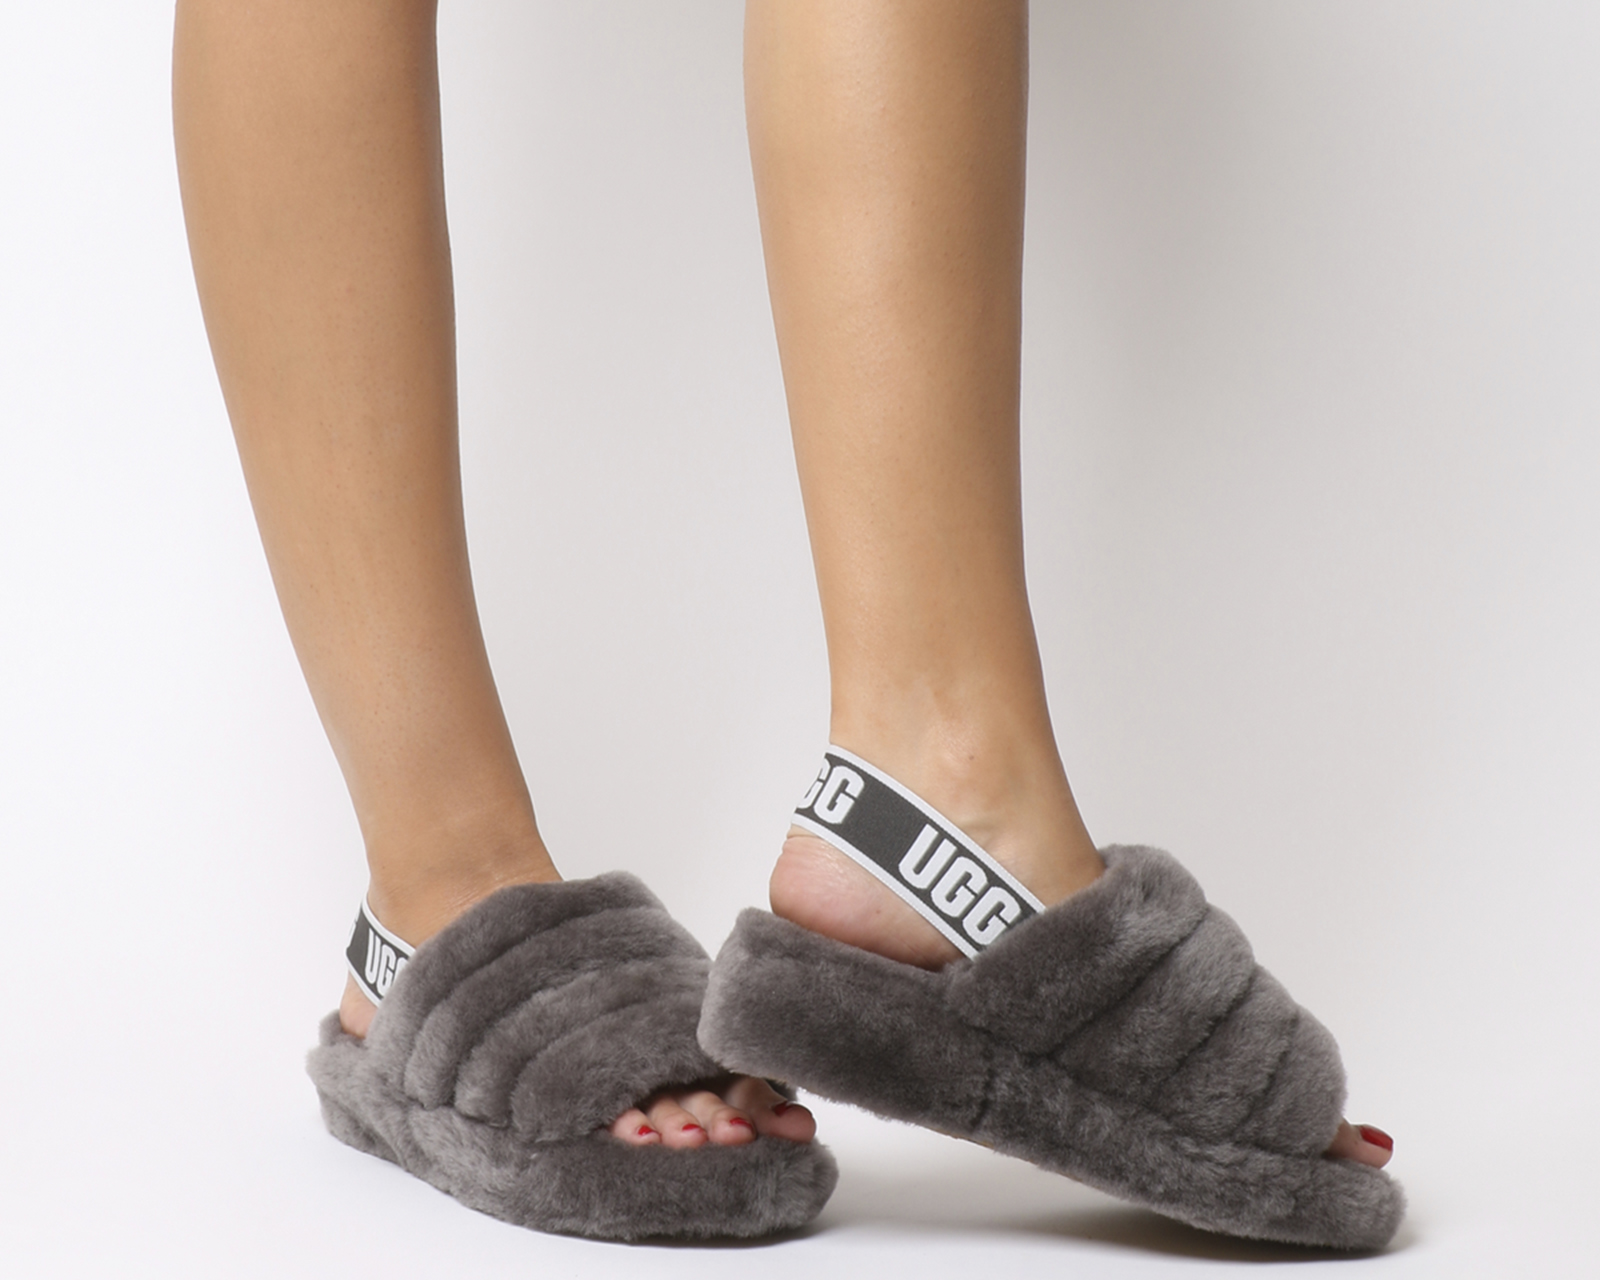 where can i buy ugg slippers near me